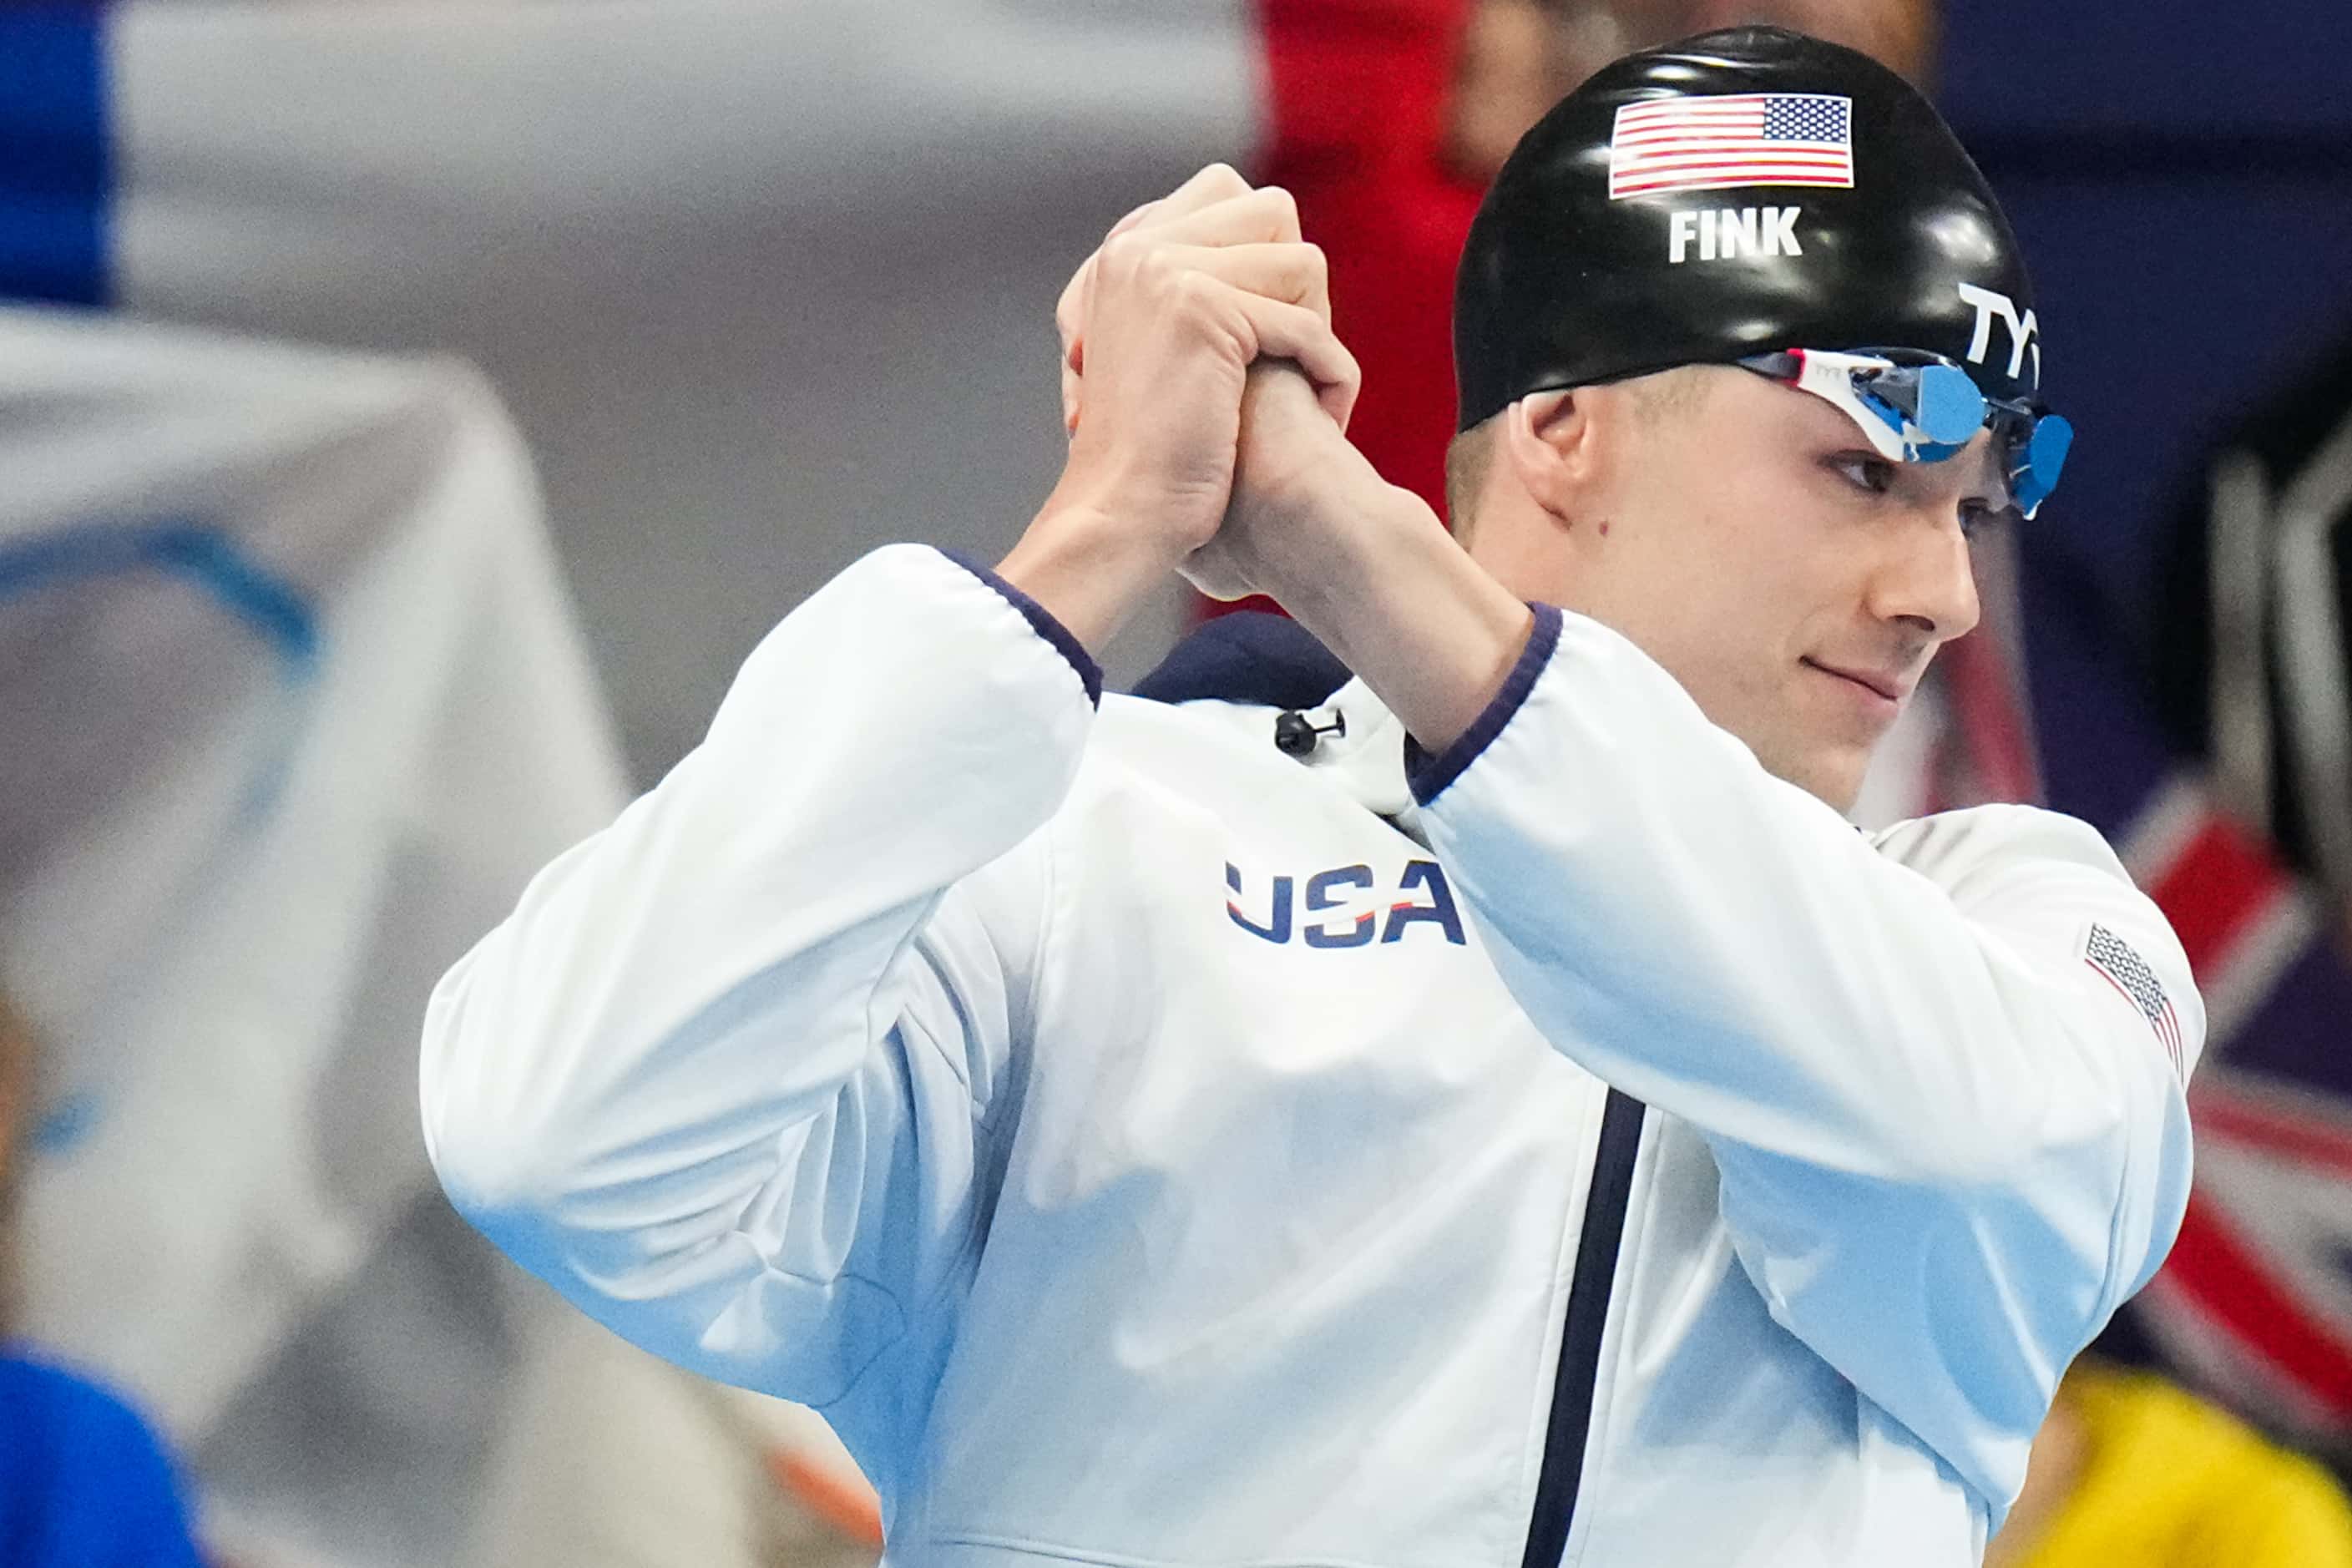 Nic Fink of the the United States is introduced before a men's 100-meter breaststroke...